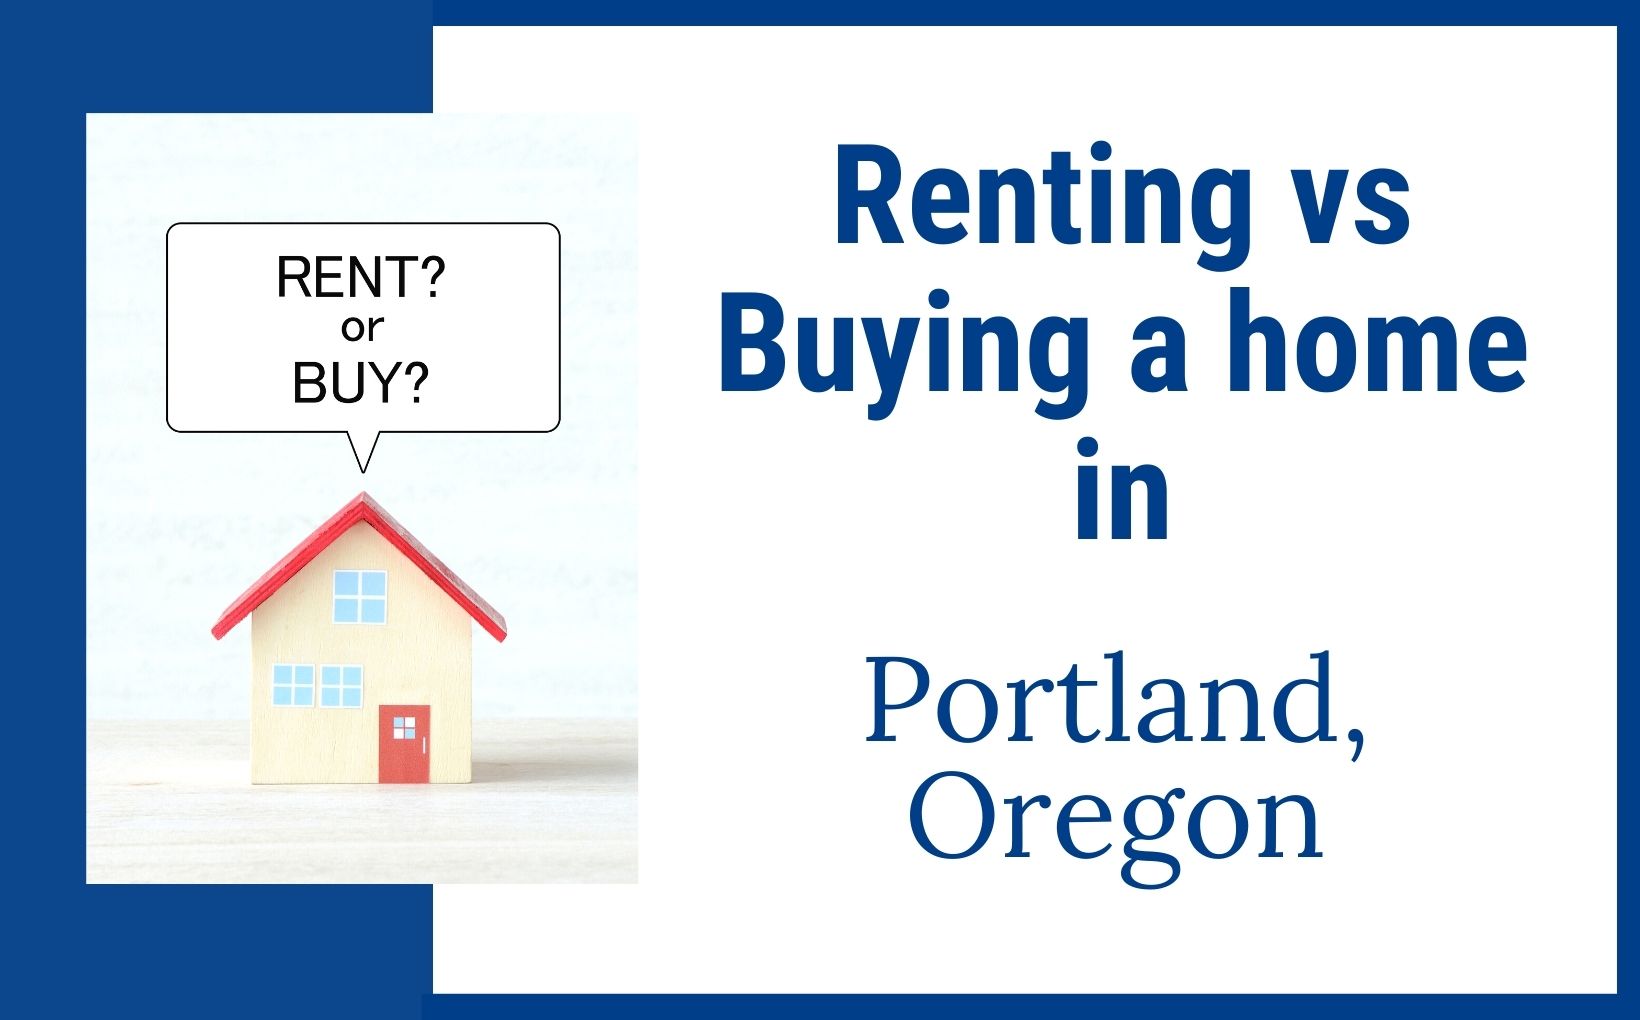 Renting vs Buying a home in Portland Oregon feature image